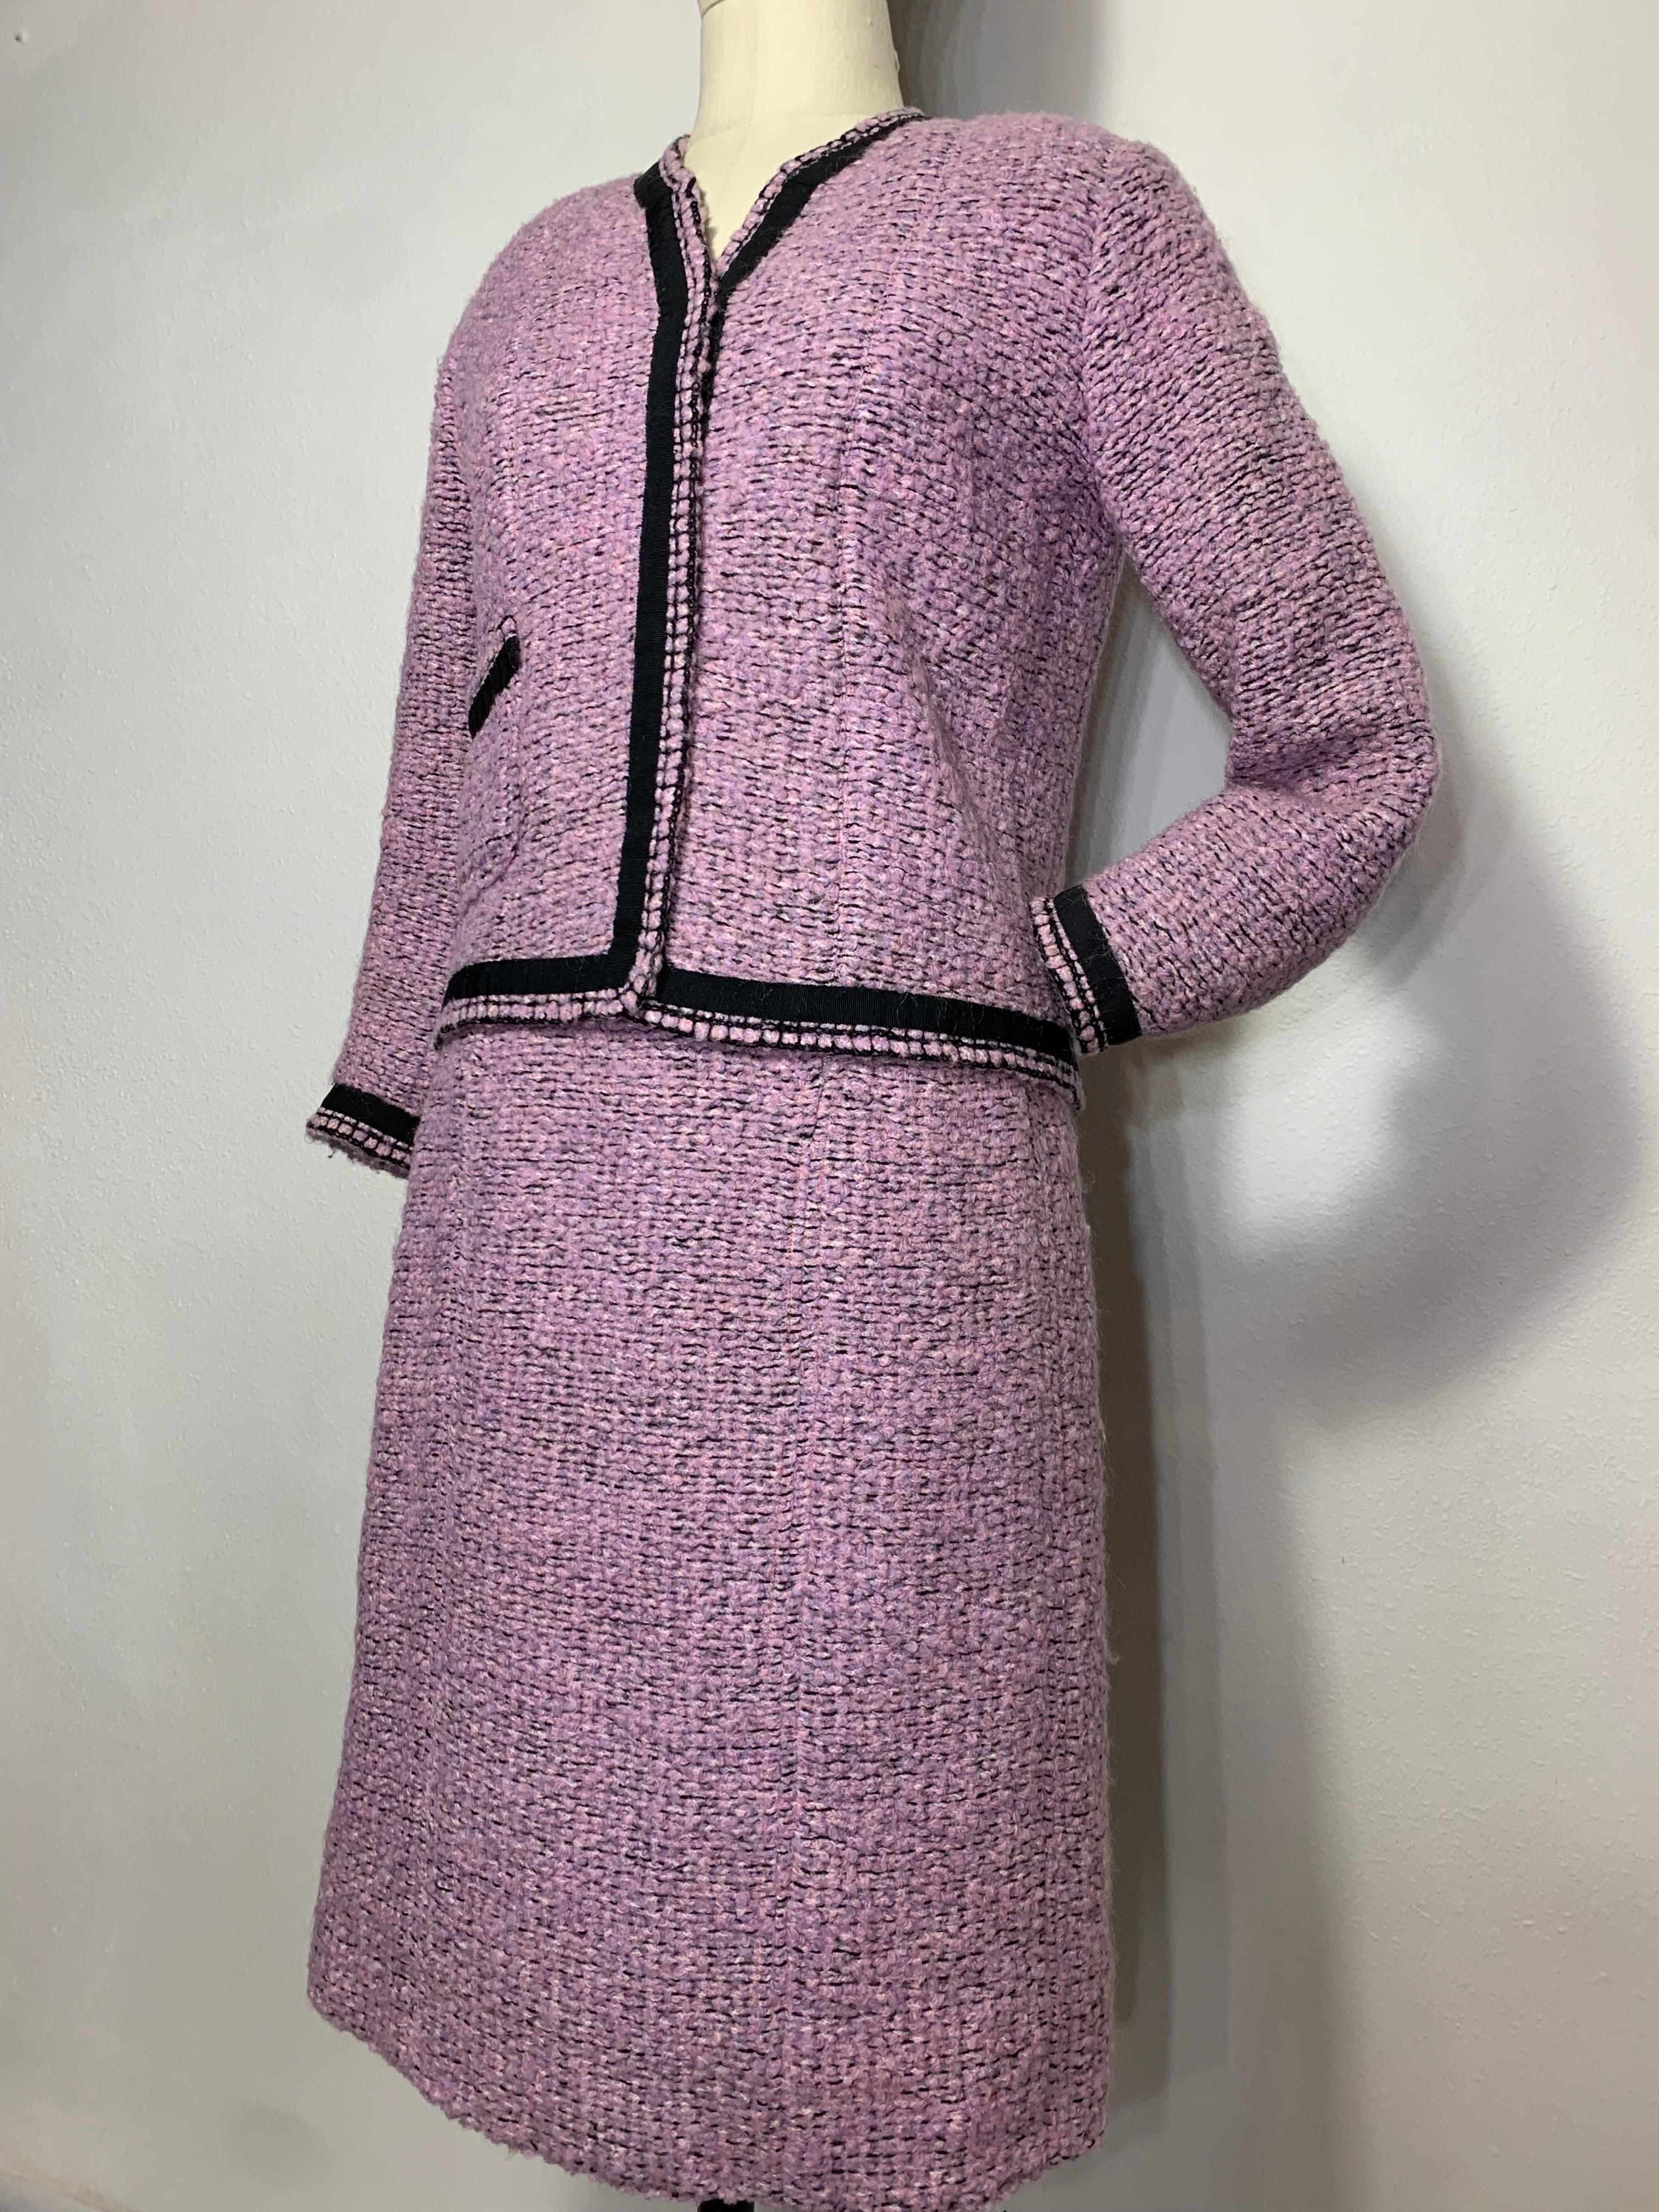 1960 Autumn/Winter Chanel Haute Couture Documented Lavender Tweed Skirt Suit: This breathtaking 2 piece haute couture suit designed by the one and only Gabrielle Chanel is made of a lavender wool tweed boucle with black grosgrain trim. A relaxed